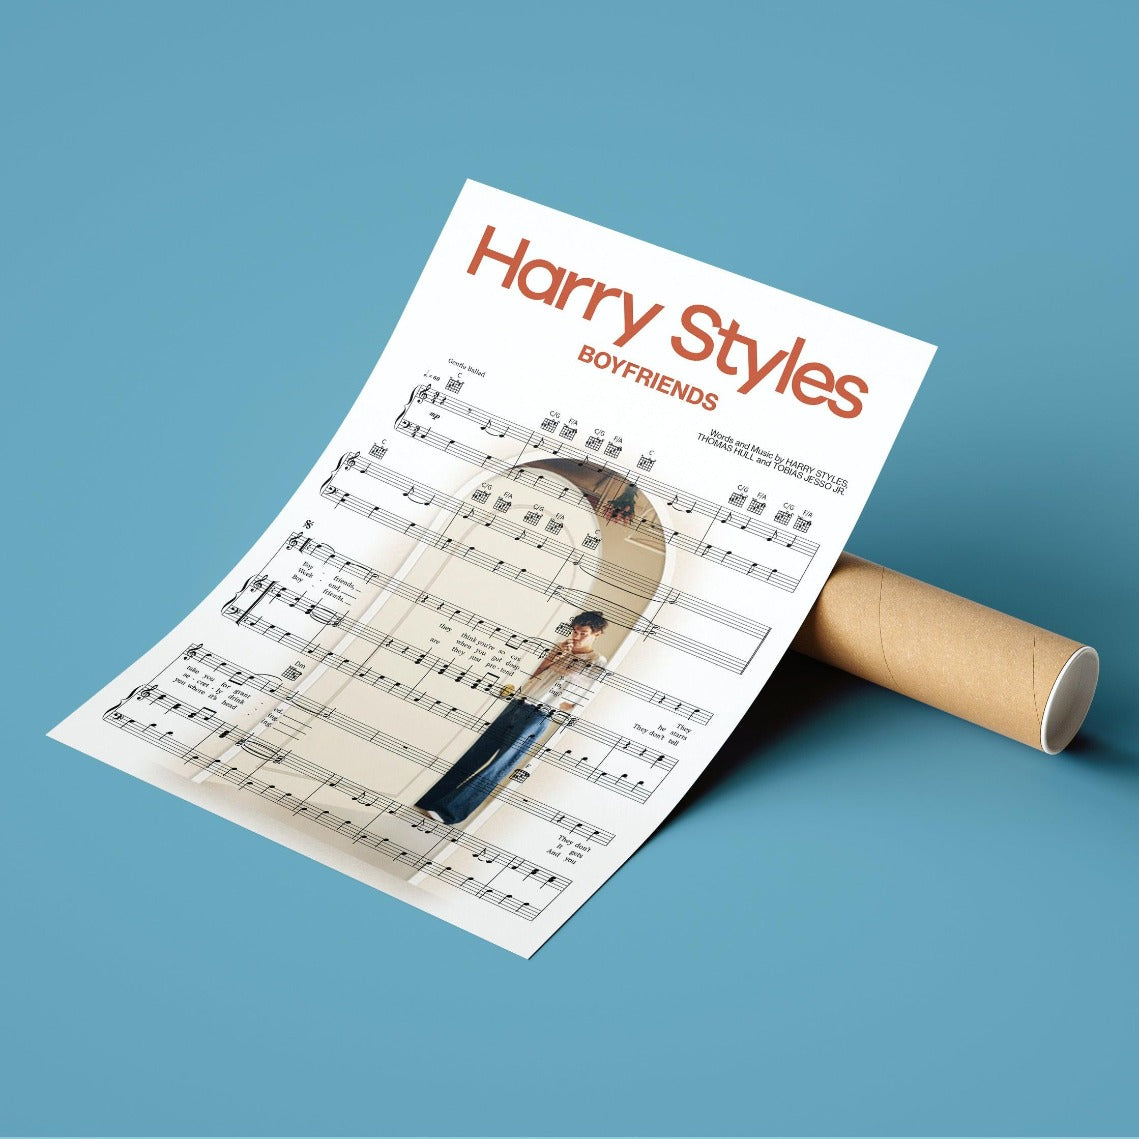 Give your walls some love with this personalized Harry Styles BOYFRIENDS poster. This beautiful print is the perfect addition to your home décor, and is also the perfect gift for any Harry Styles fan. The perfect way to show your love for your favorite song, and the perfect way to show your love for art.